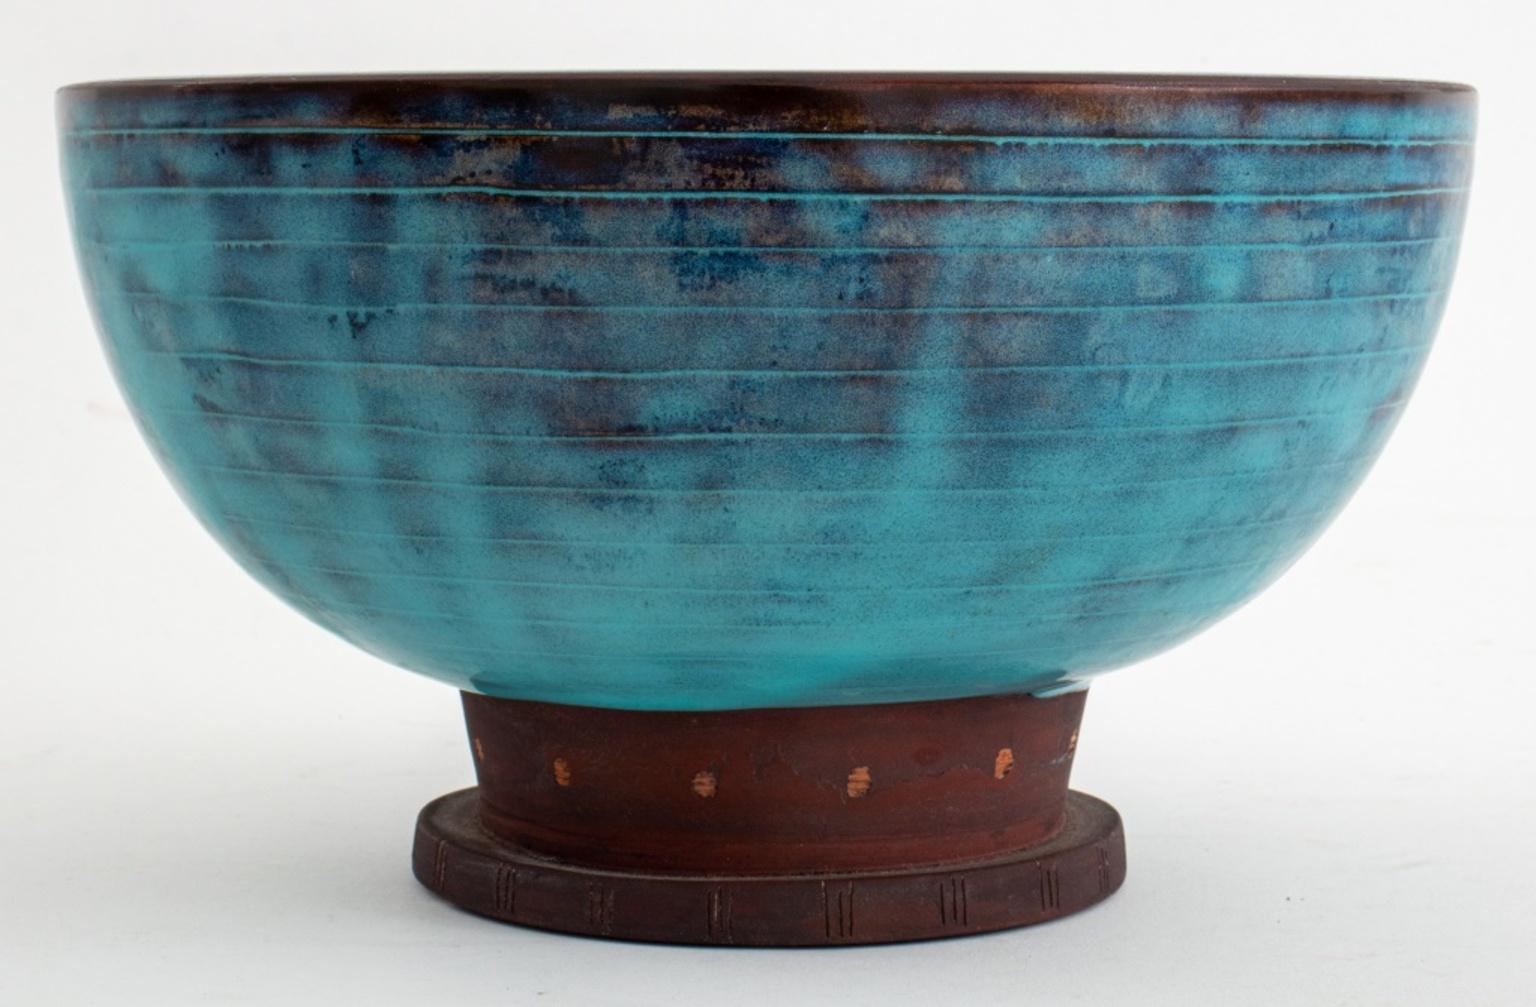 Attributed to Wilhelm Kage (Swedish, 1930–1960) Gustavsberg studio art pottery footed bowl glazed in robin's egg blue, spuriously etched 